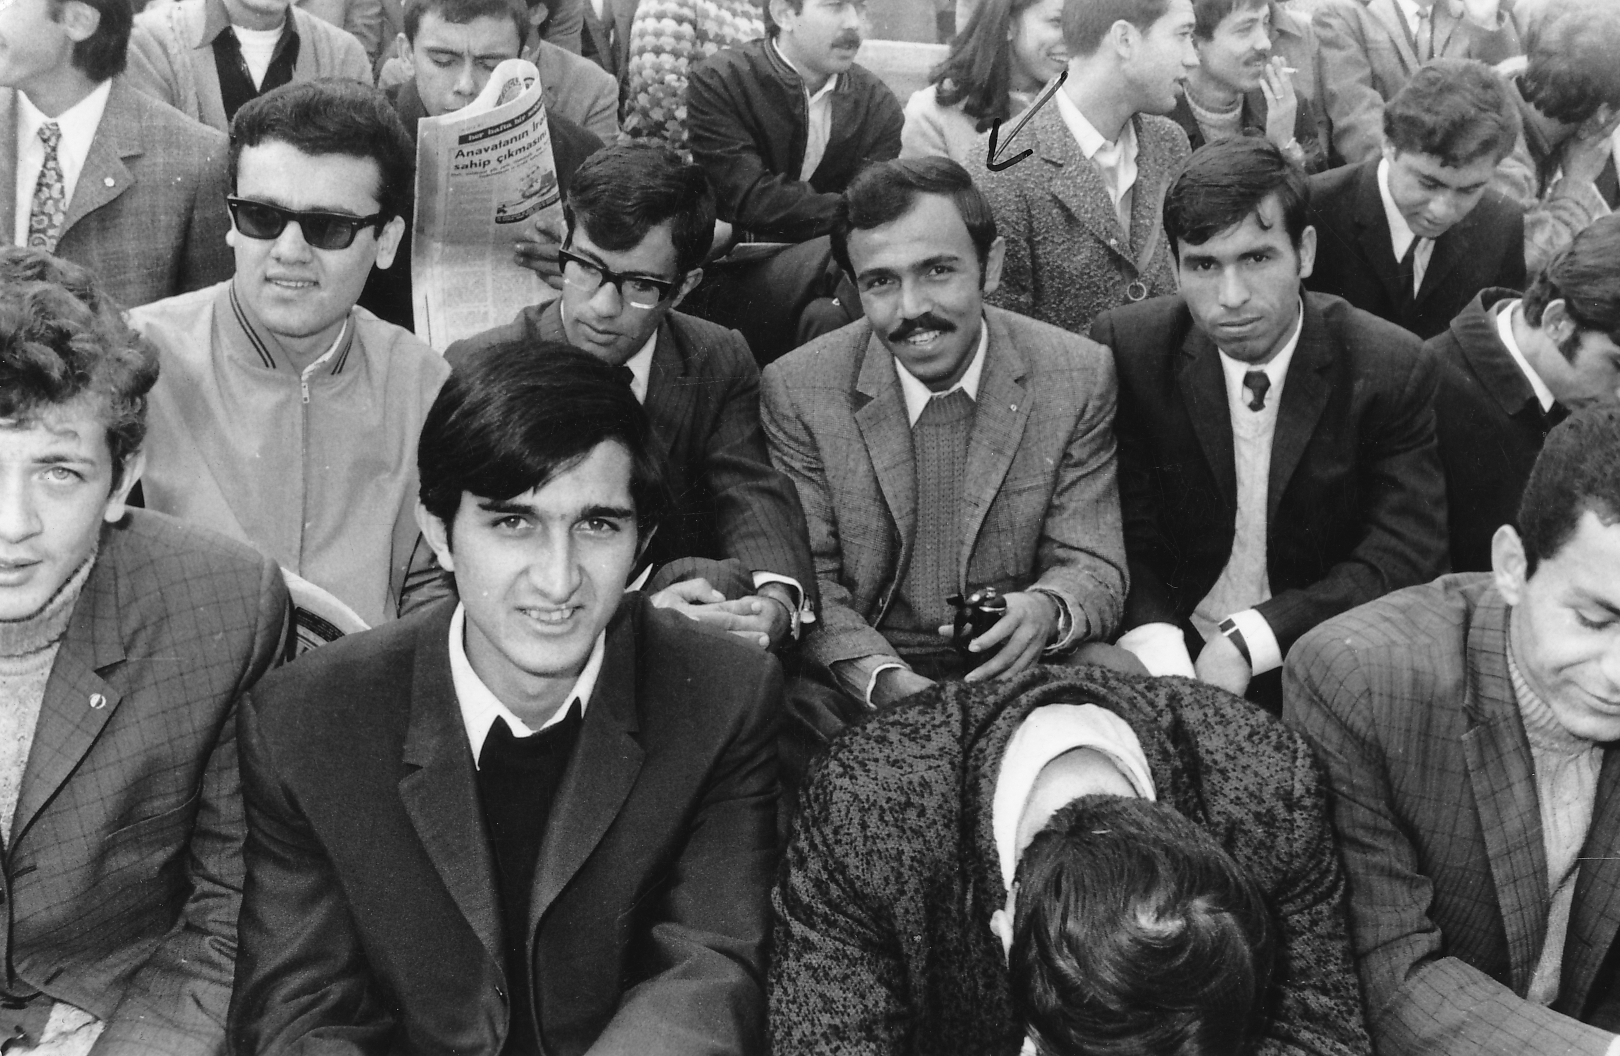 1968, students waiting for a demonstration to start